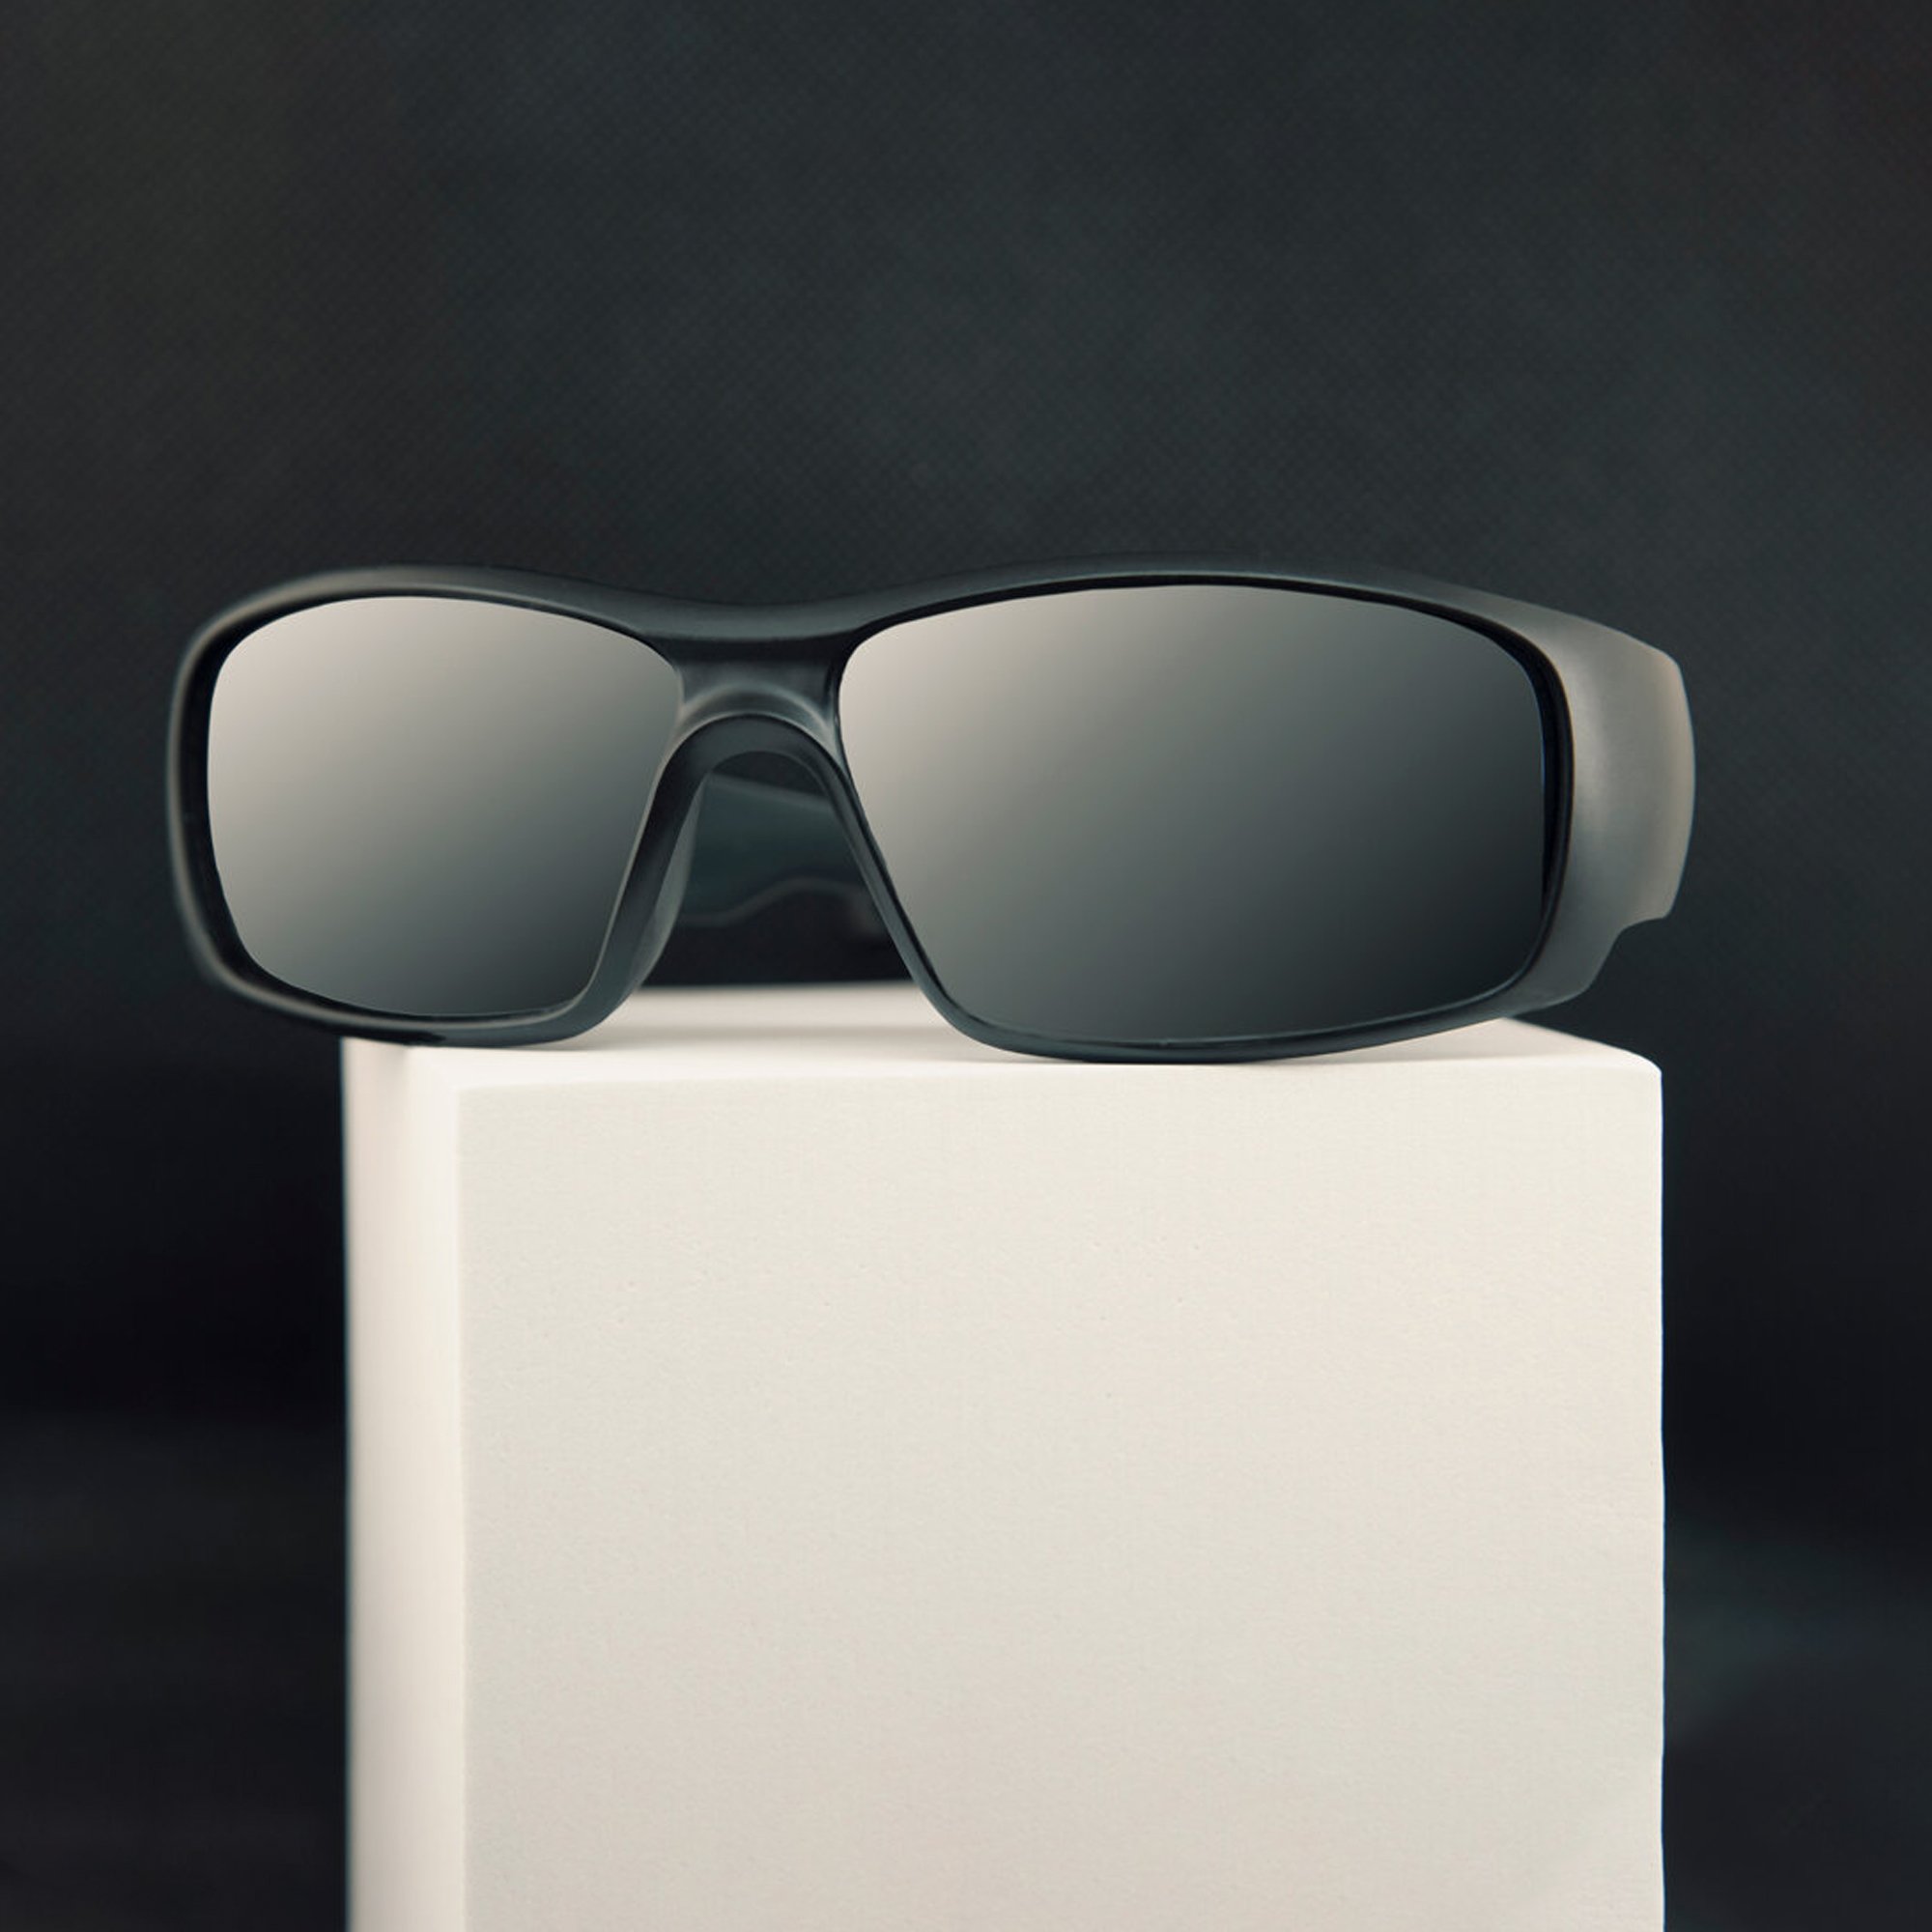  Black sunglasses photographed on a white block against a black background. 